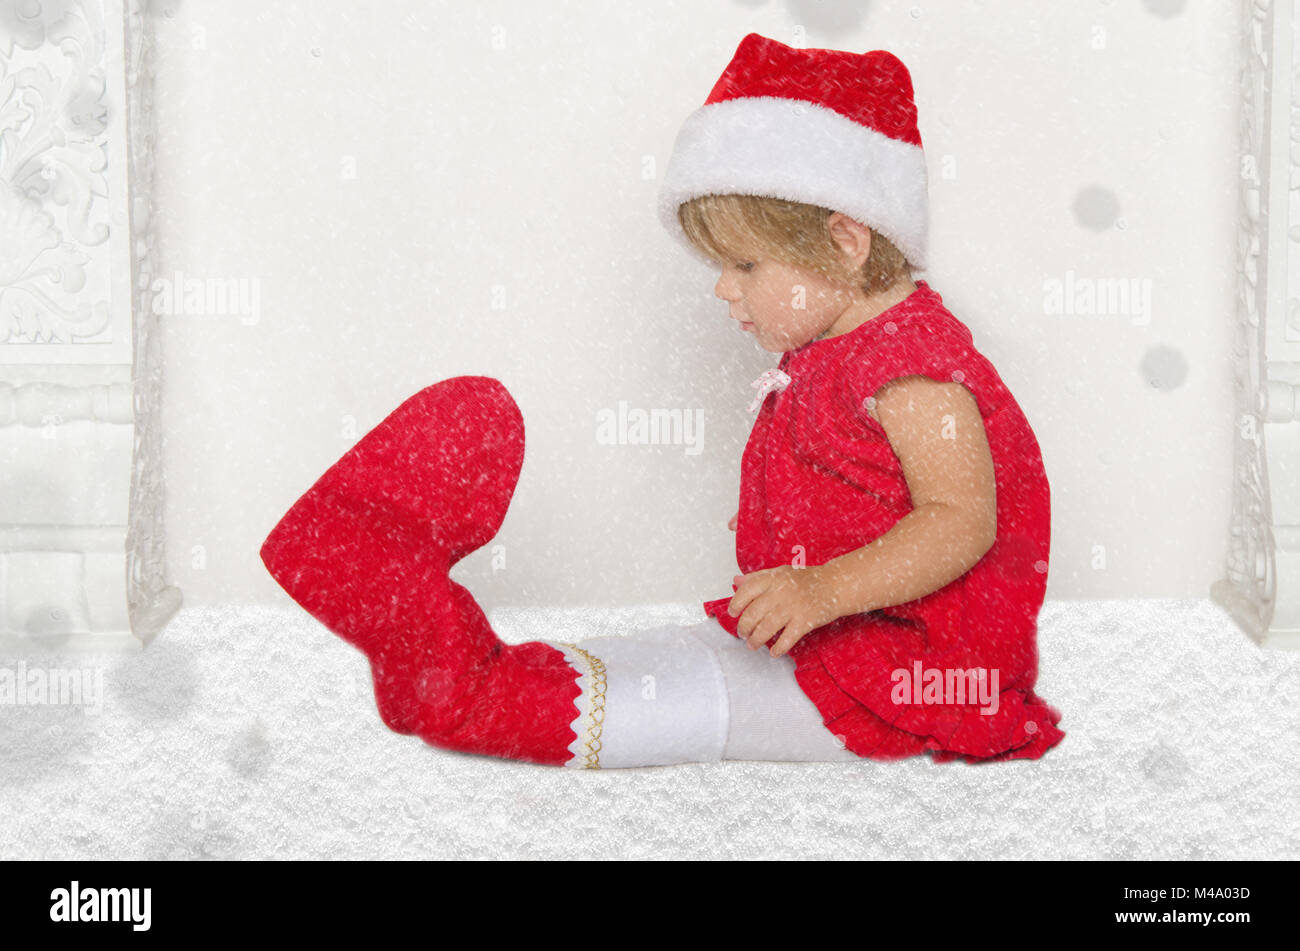 Small child in Santa suit sitting on floor with snow Stock Photo